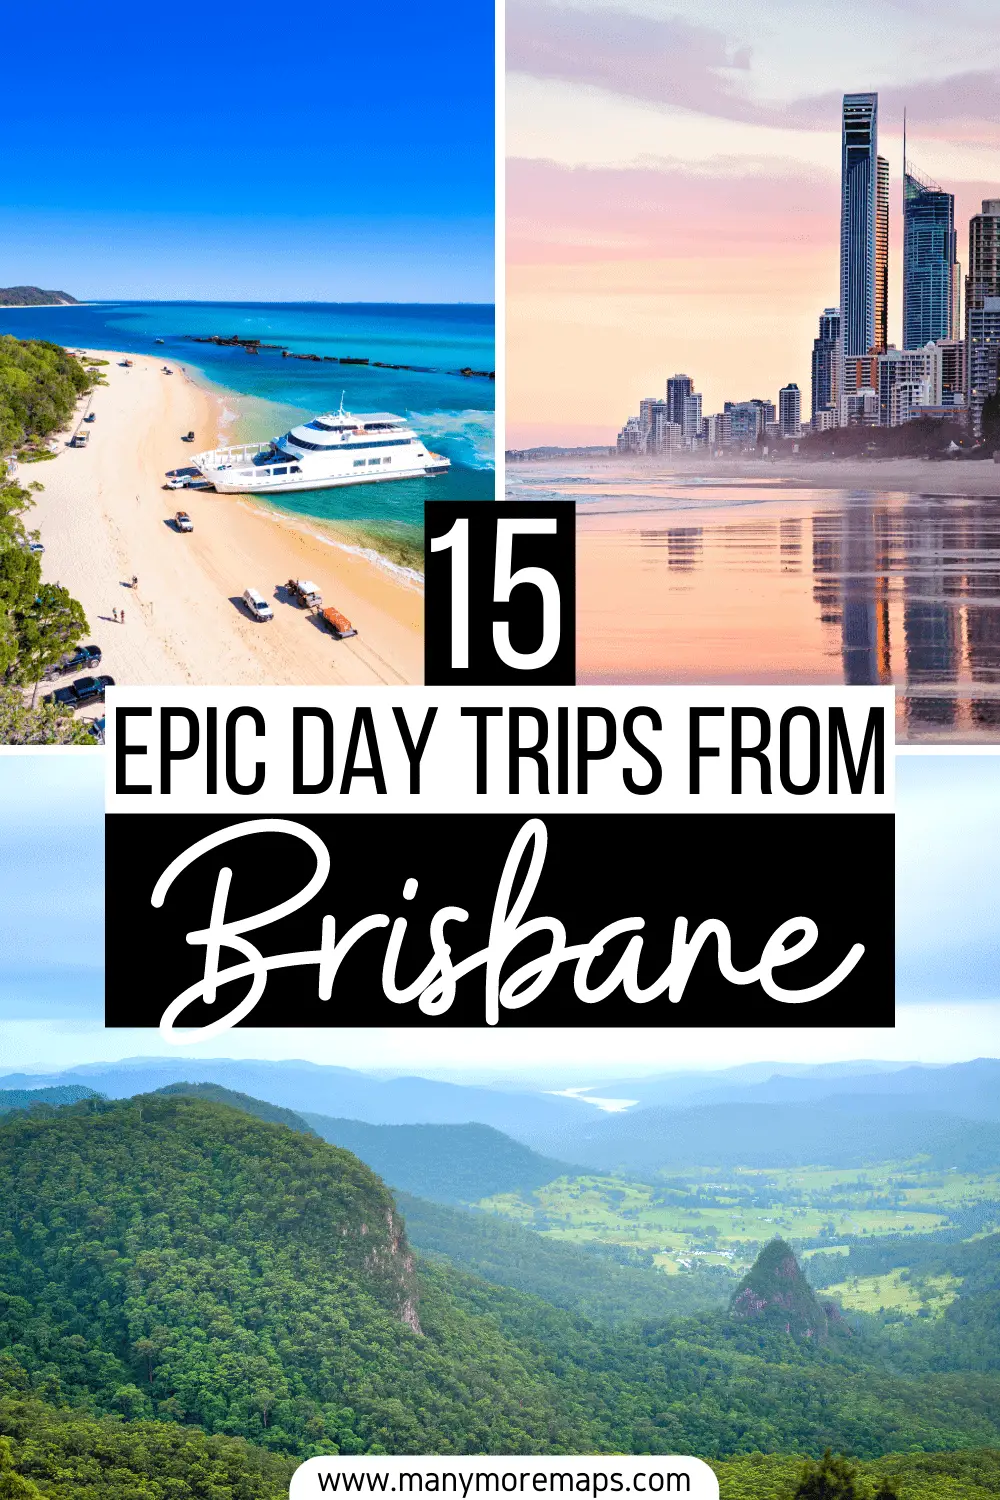 Want to know what the best day trips from Brisbane, Australia are? From Moreton Island to the Gold Coast, here are the best places to visit and things to do near and around Brisbane so that you can explore more of Queensland!